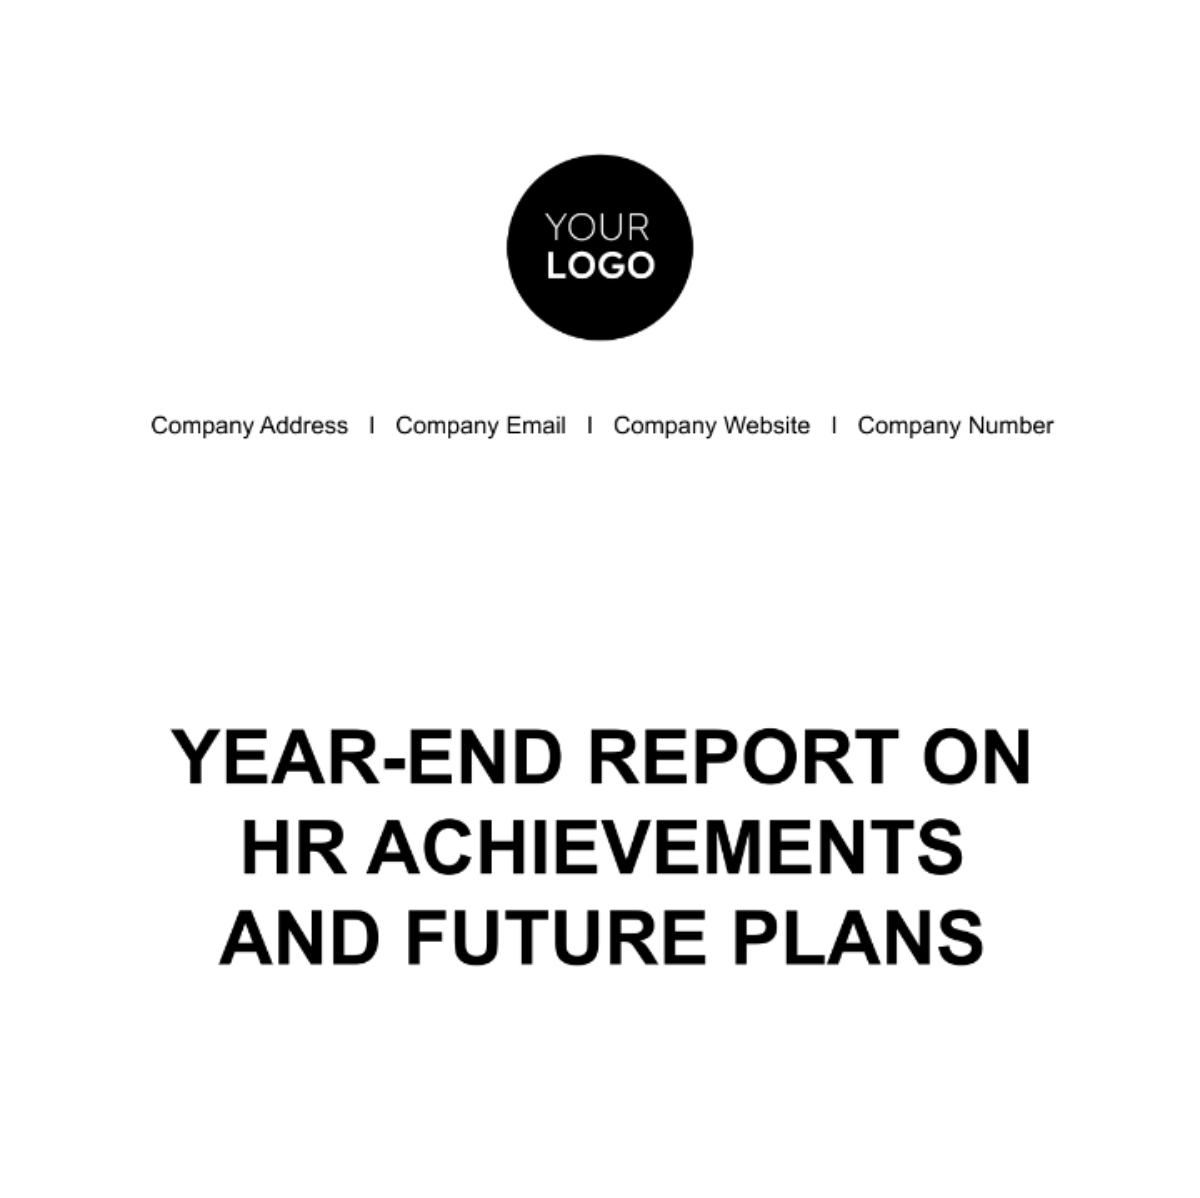 Year-End Report on HR Achievements and Future Plans Template